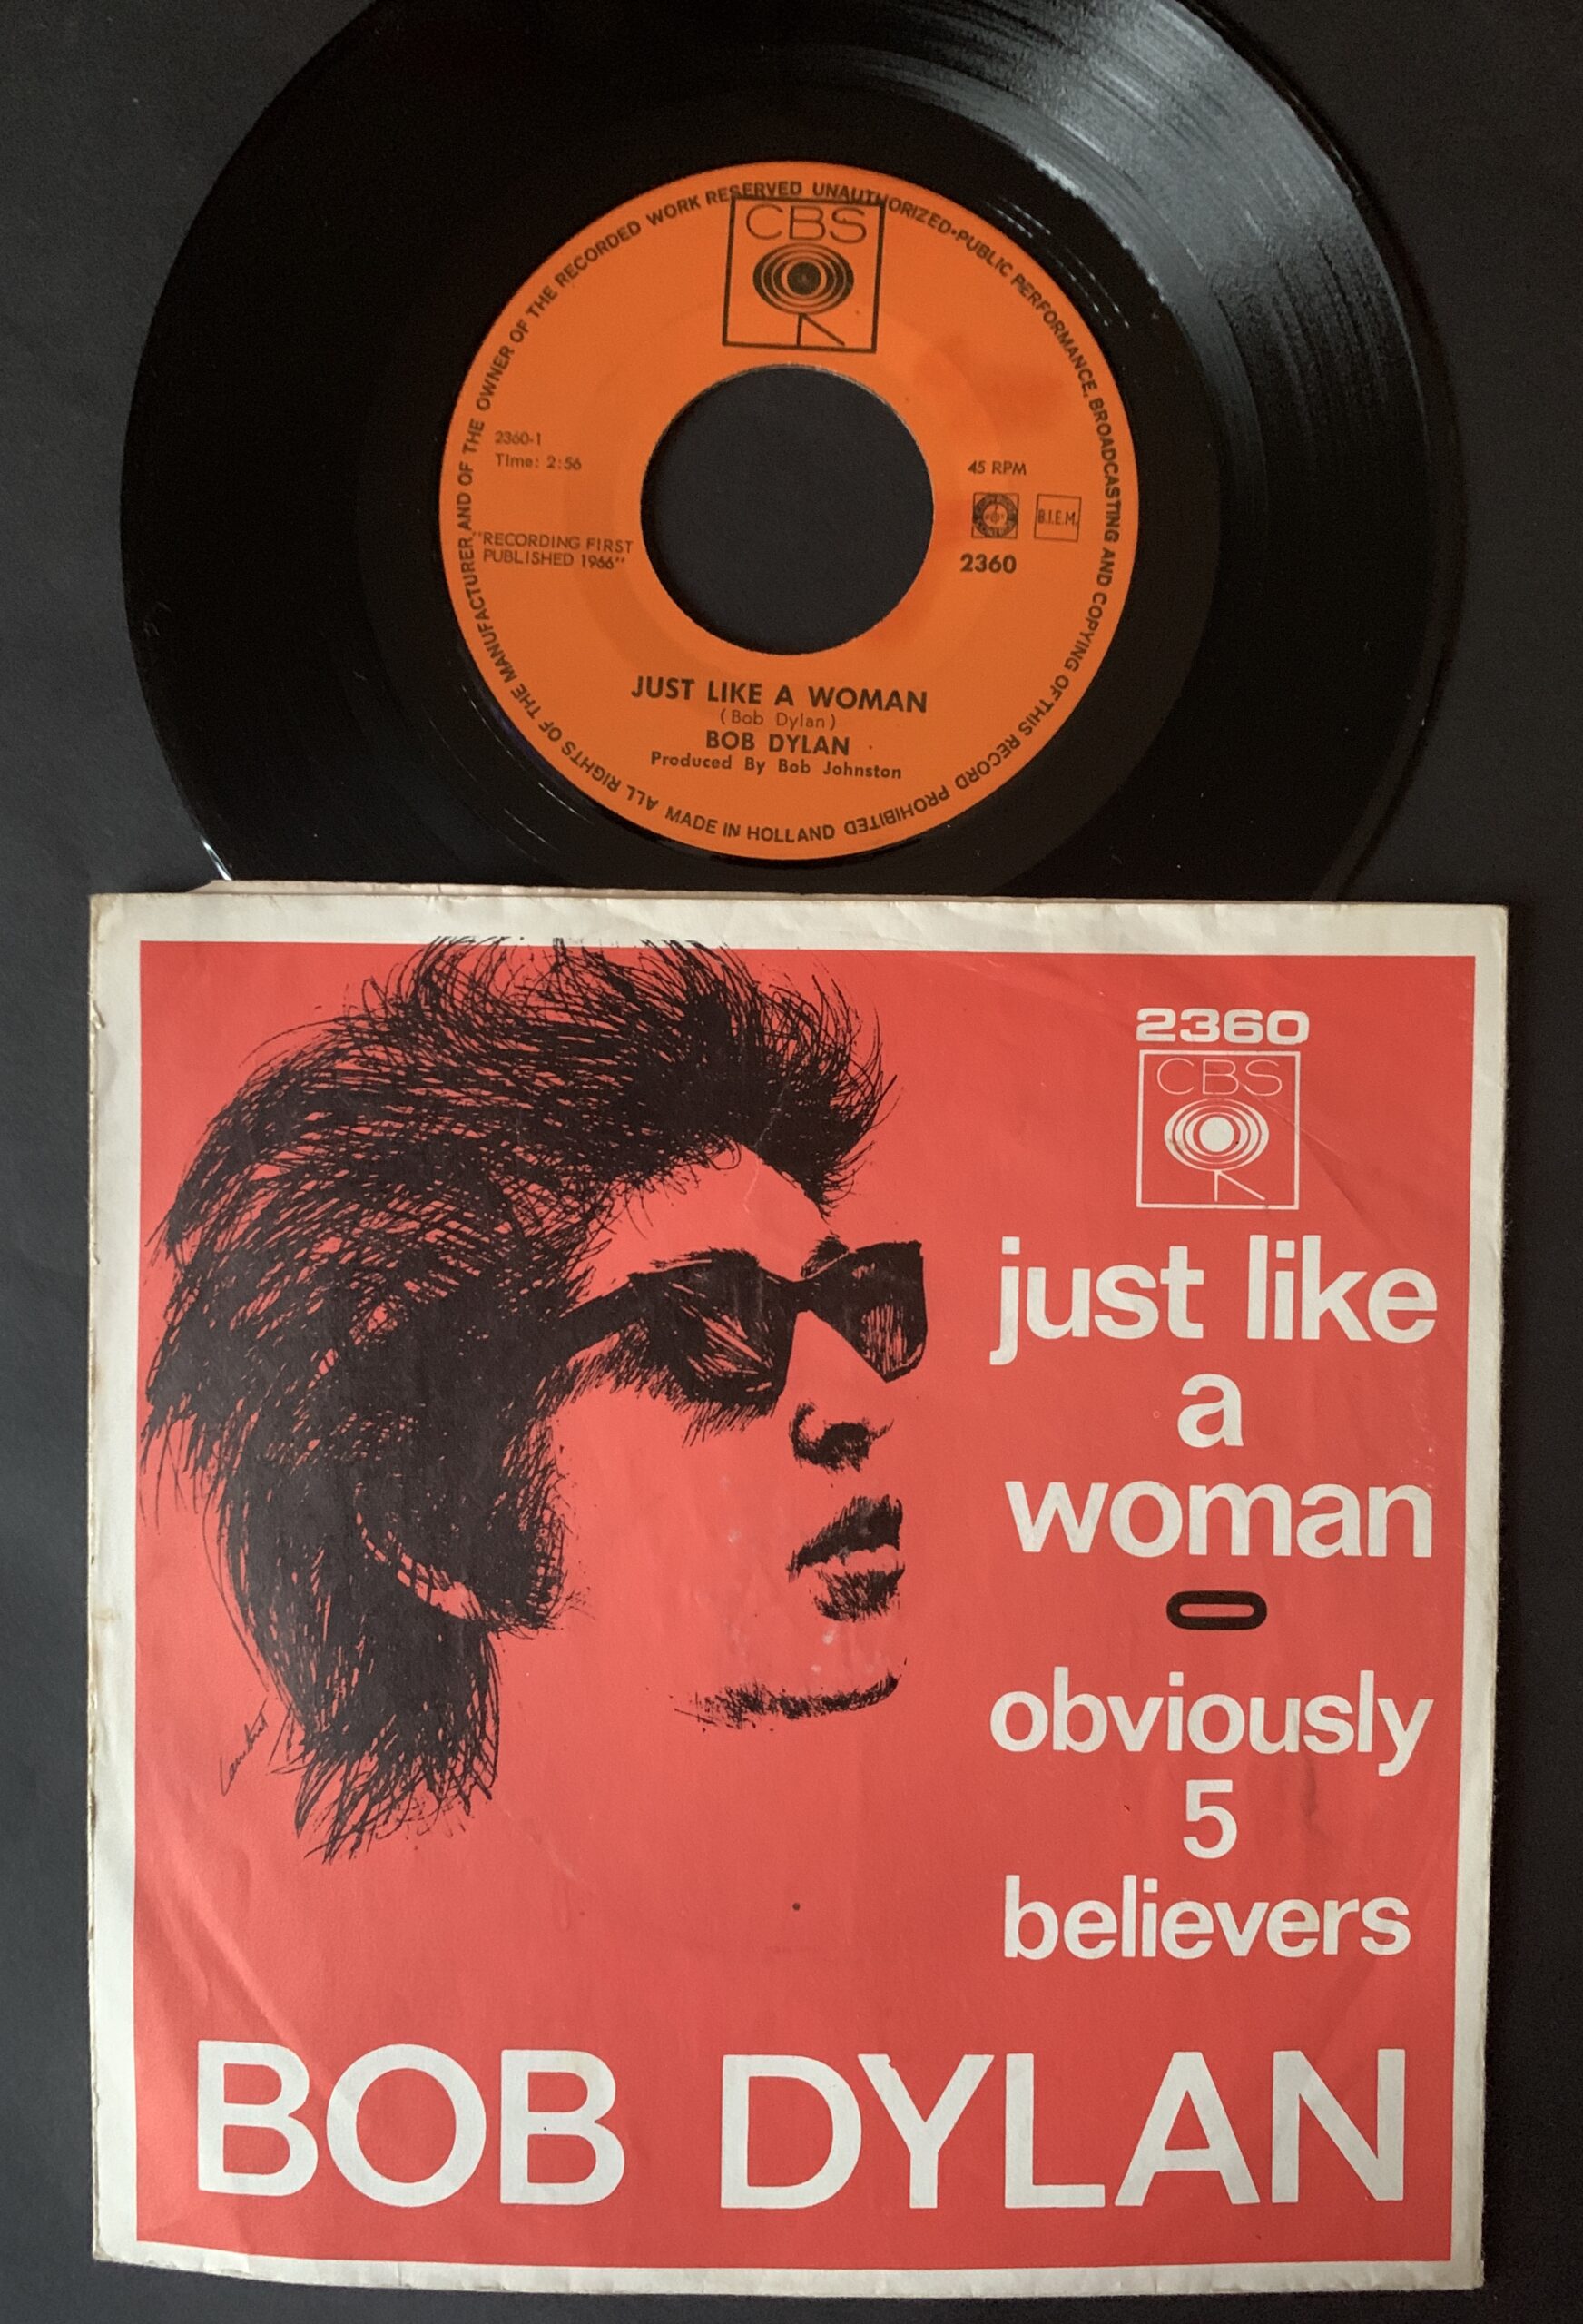 Bob Dylan Just Like A Woman/Obviously believers 1996 Dutch Pic sleeve  45rpm. Pleasures of Past Times